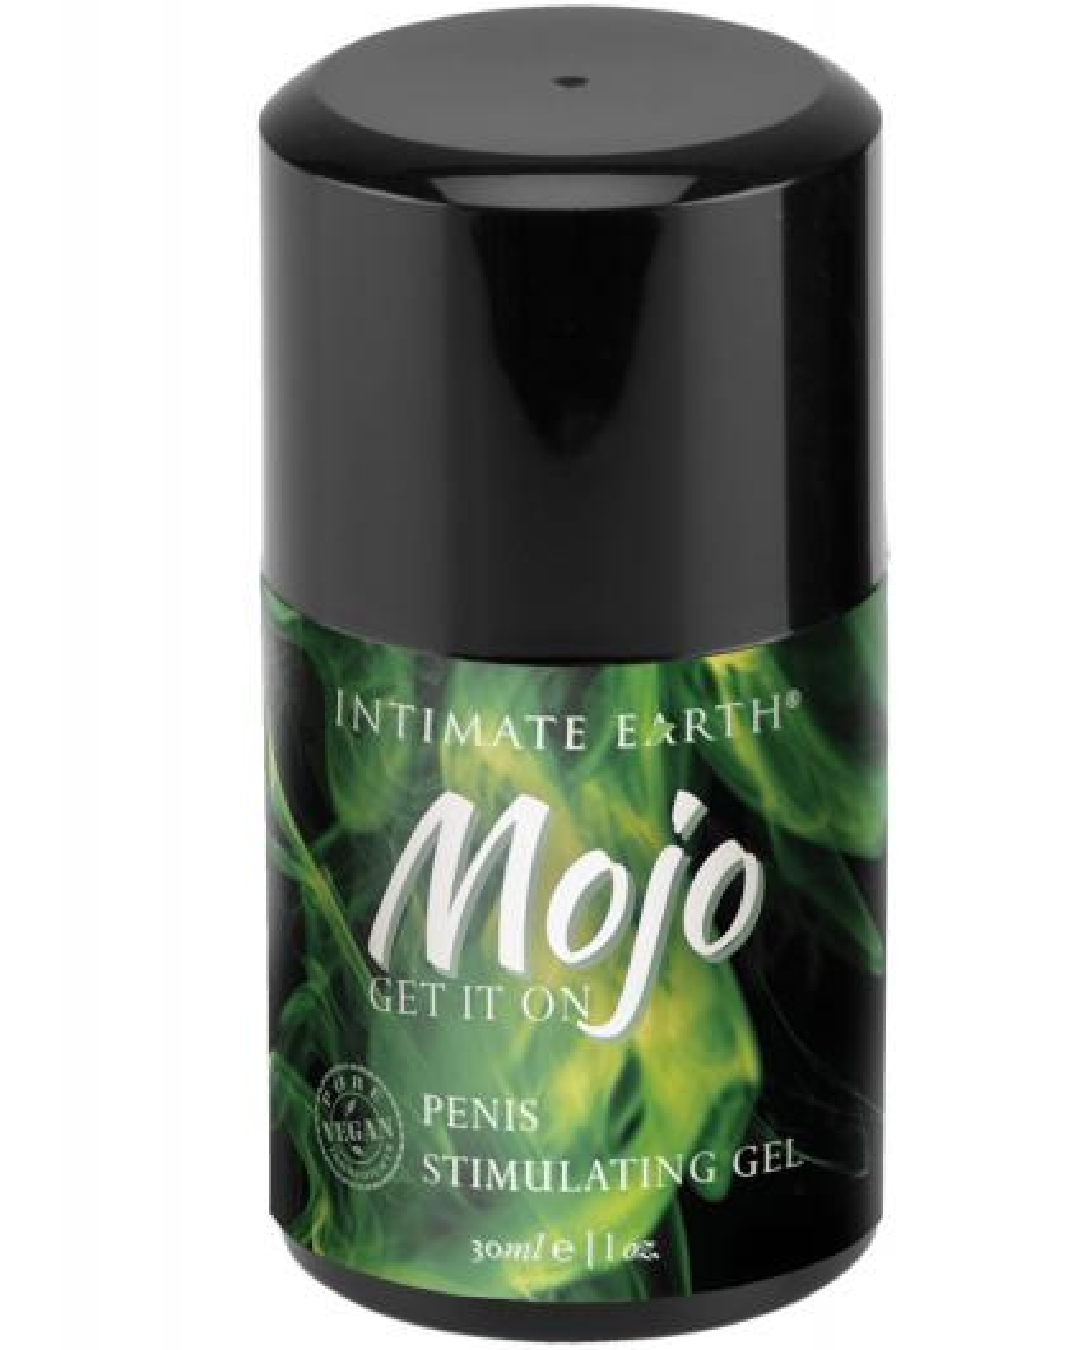 Mojo Penis Stimulating Gel by Intimate Earth 1 oz